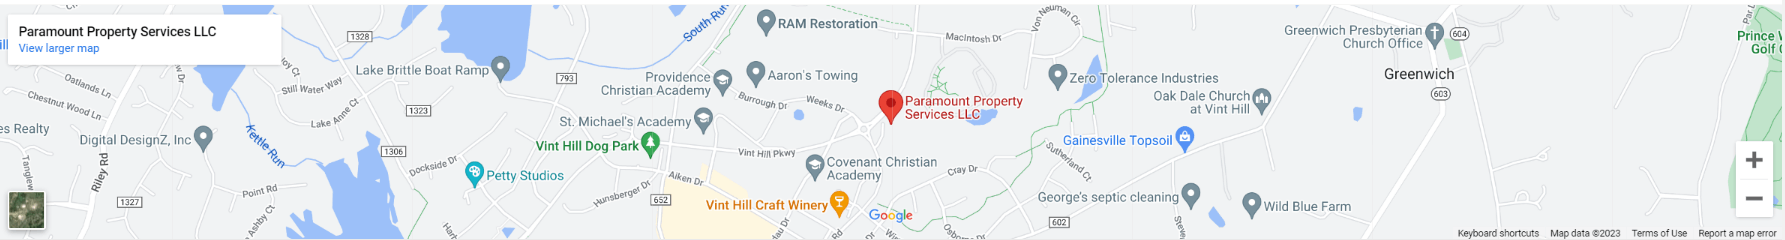 A map of paramount property services, llc.